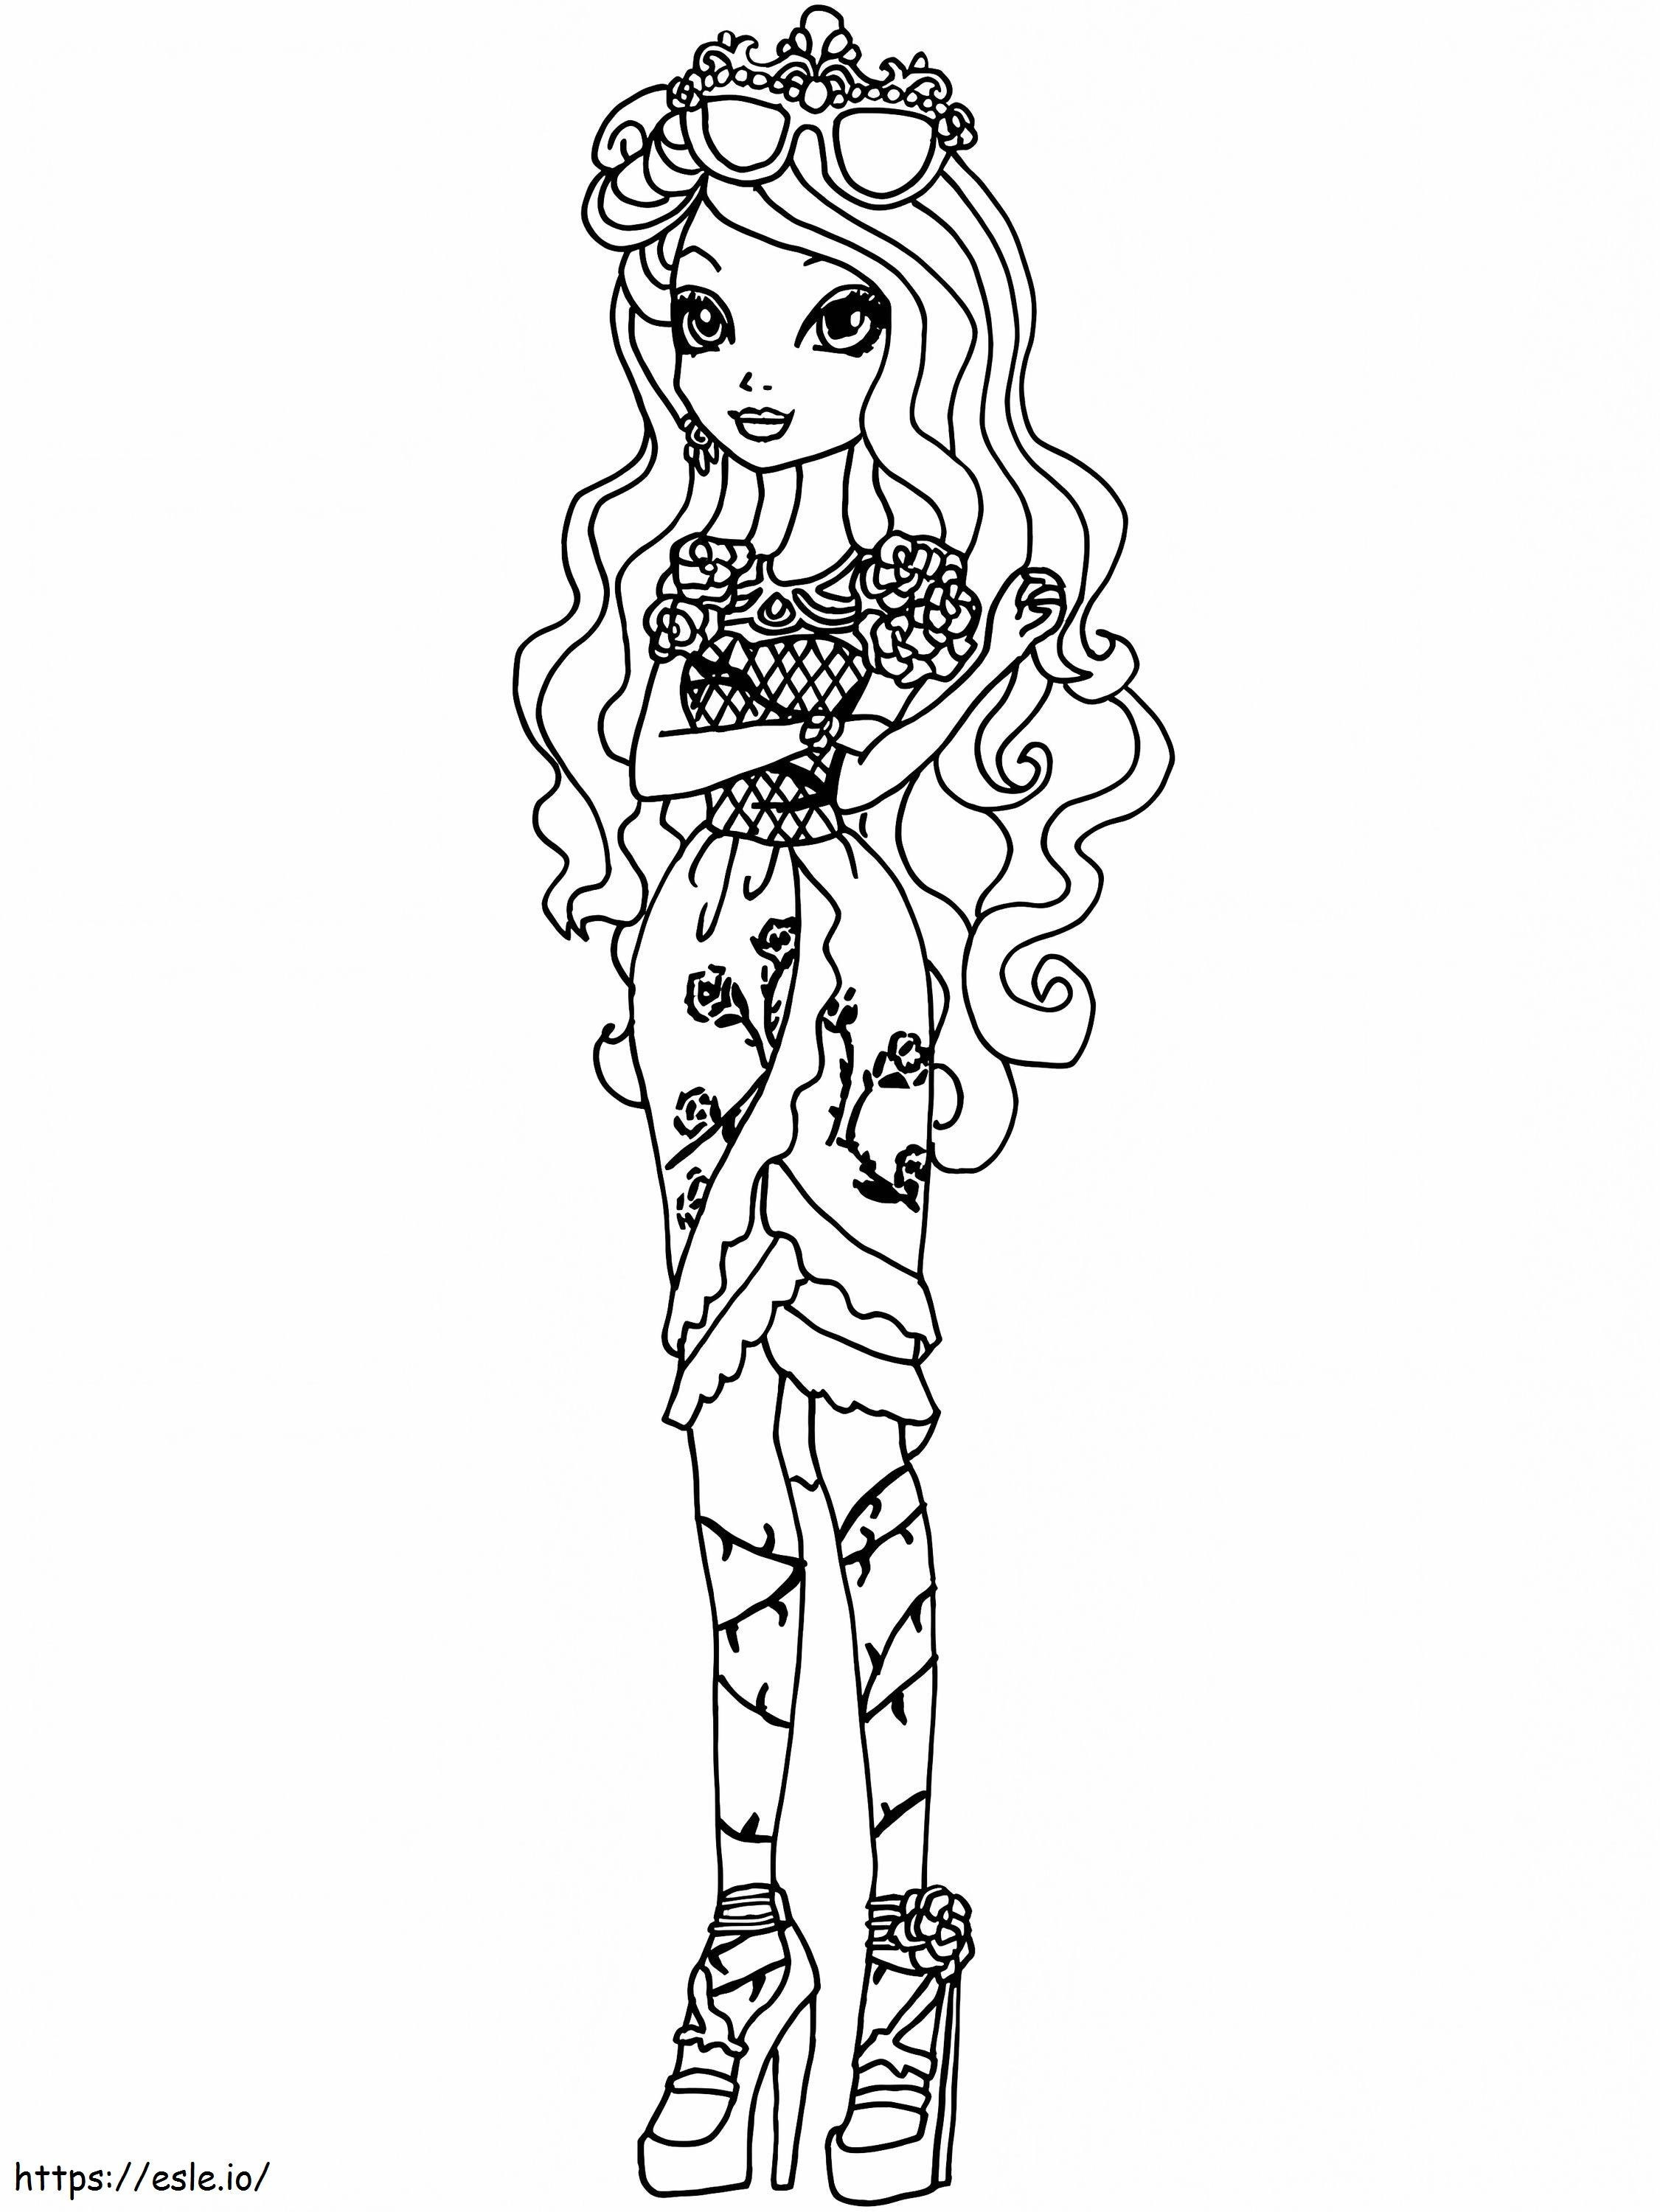 Hu Egsgs coloring page